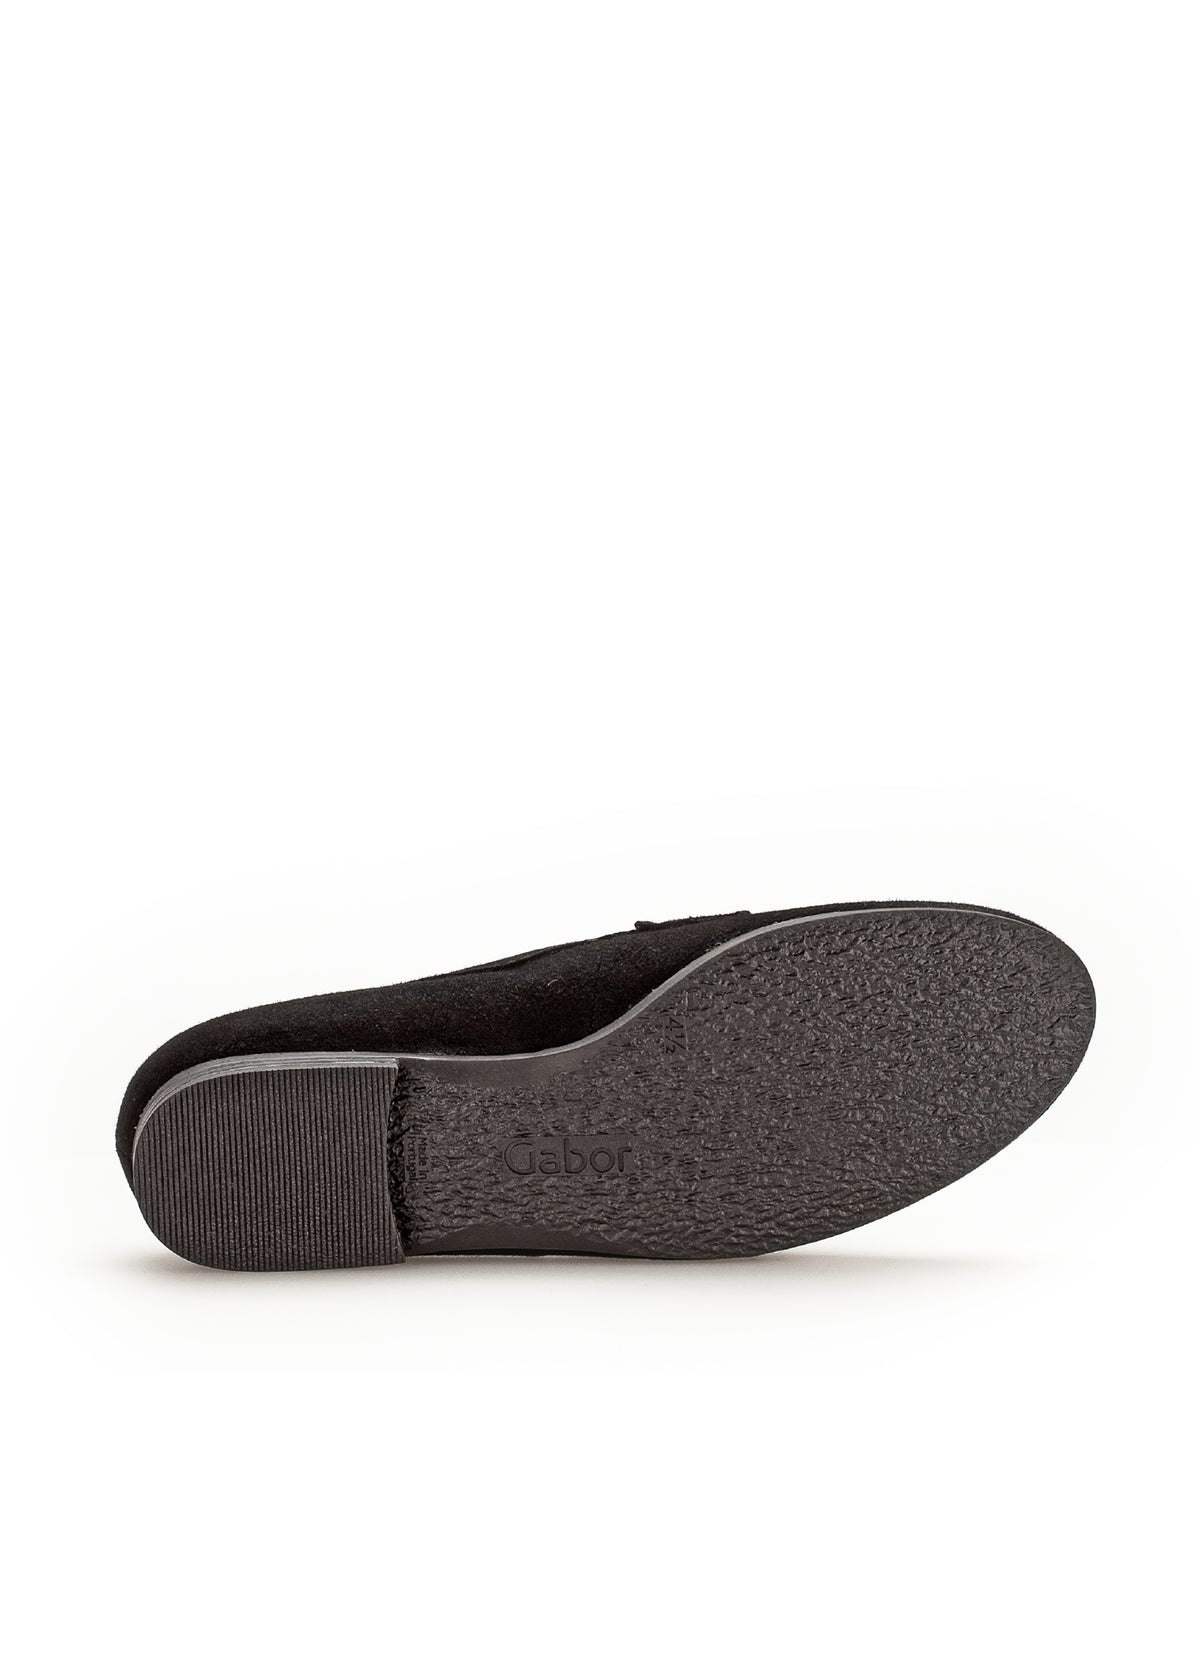 Loafers with a silver strap - black nubuck leather